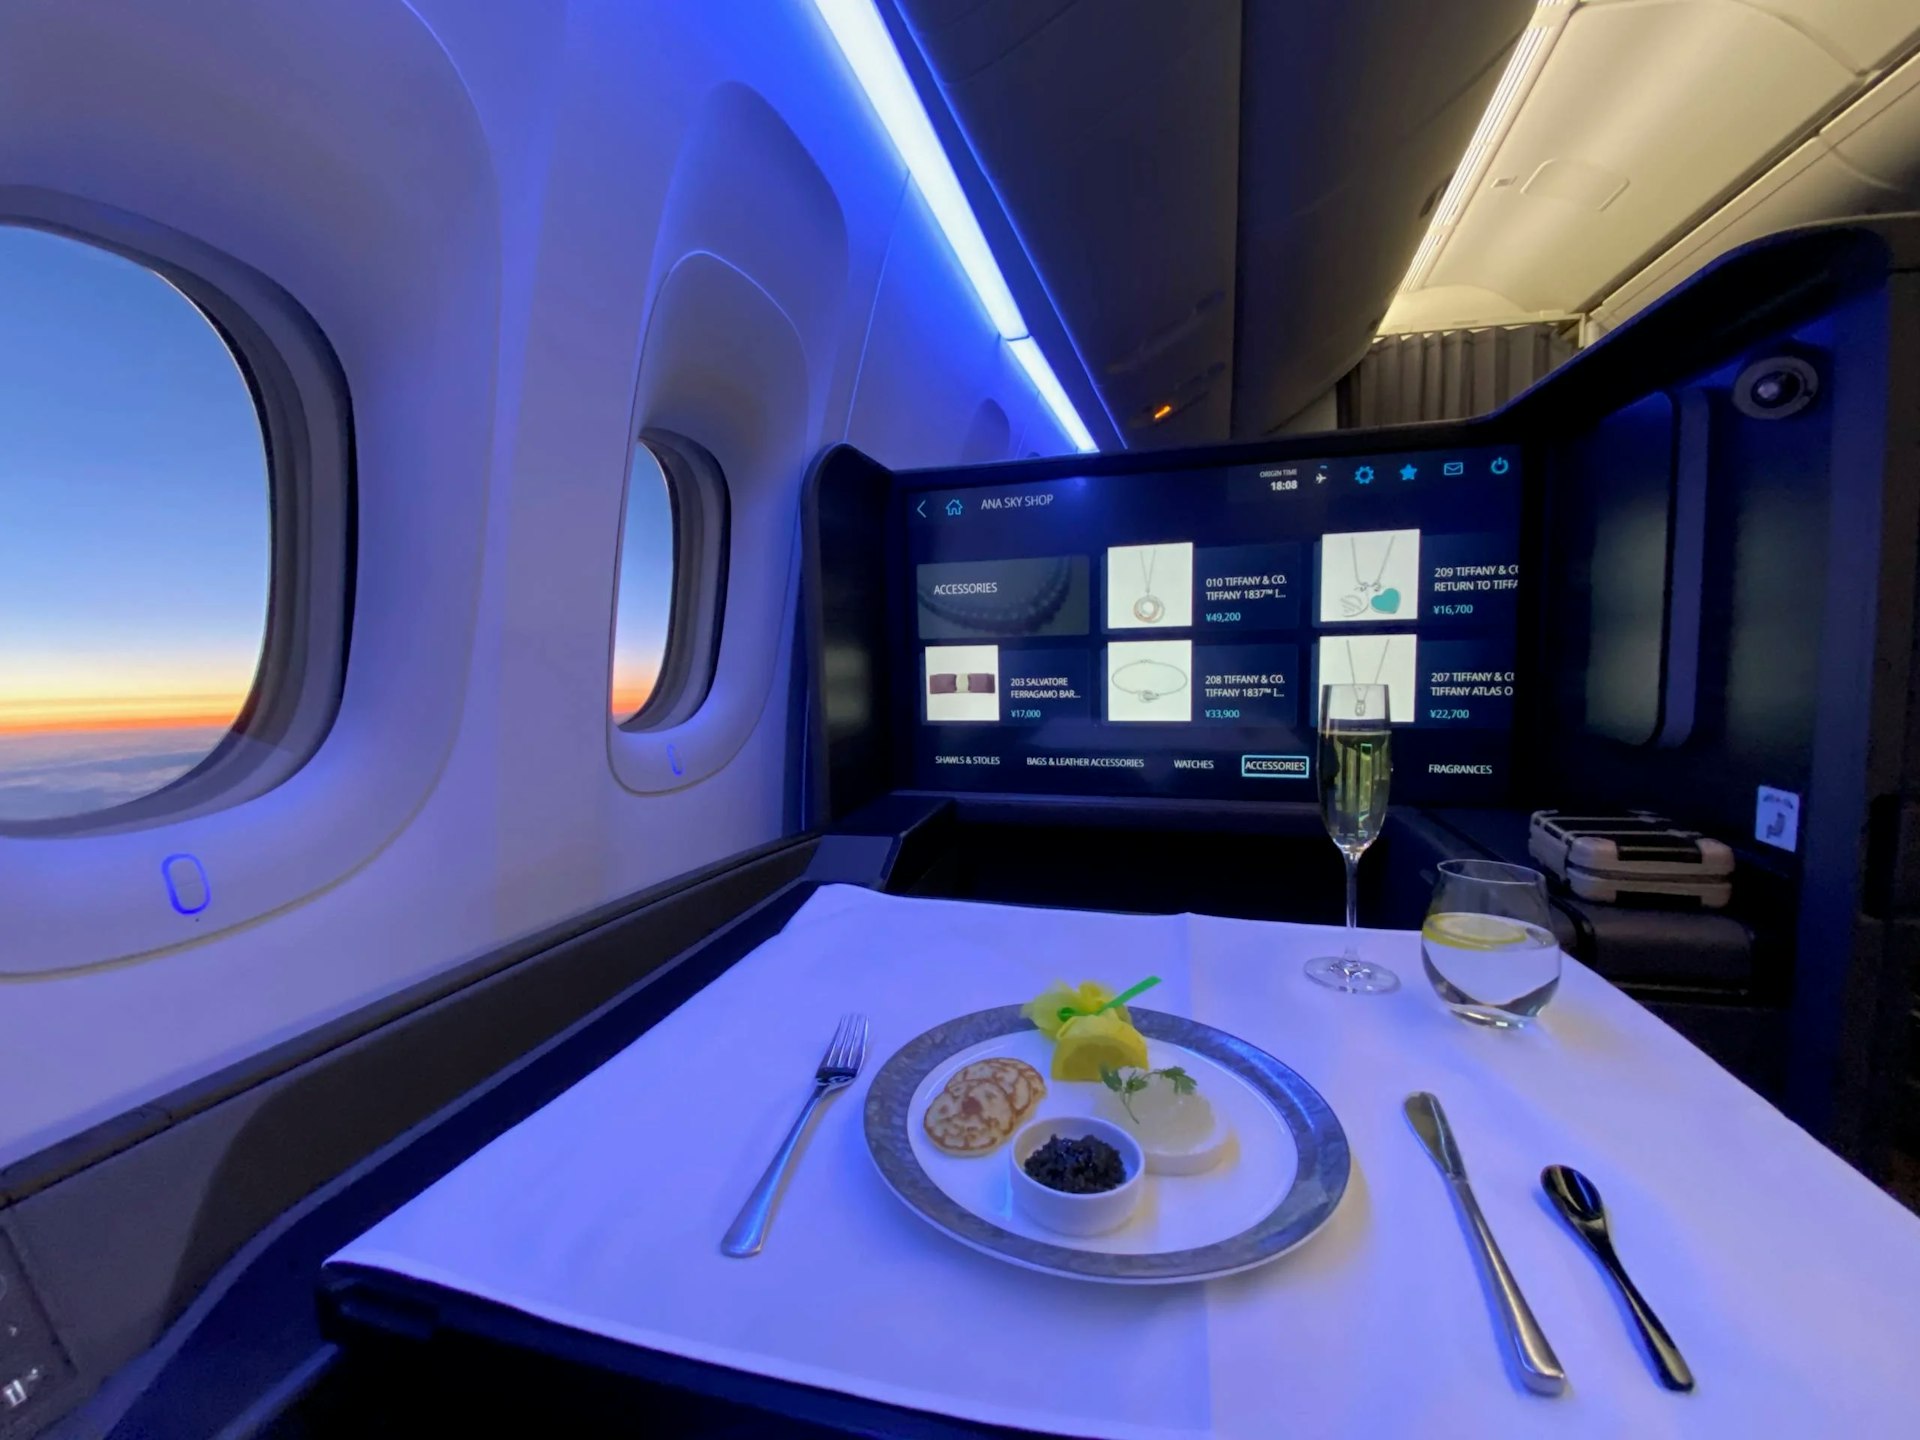 The first class suite on ANA